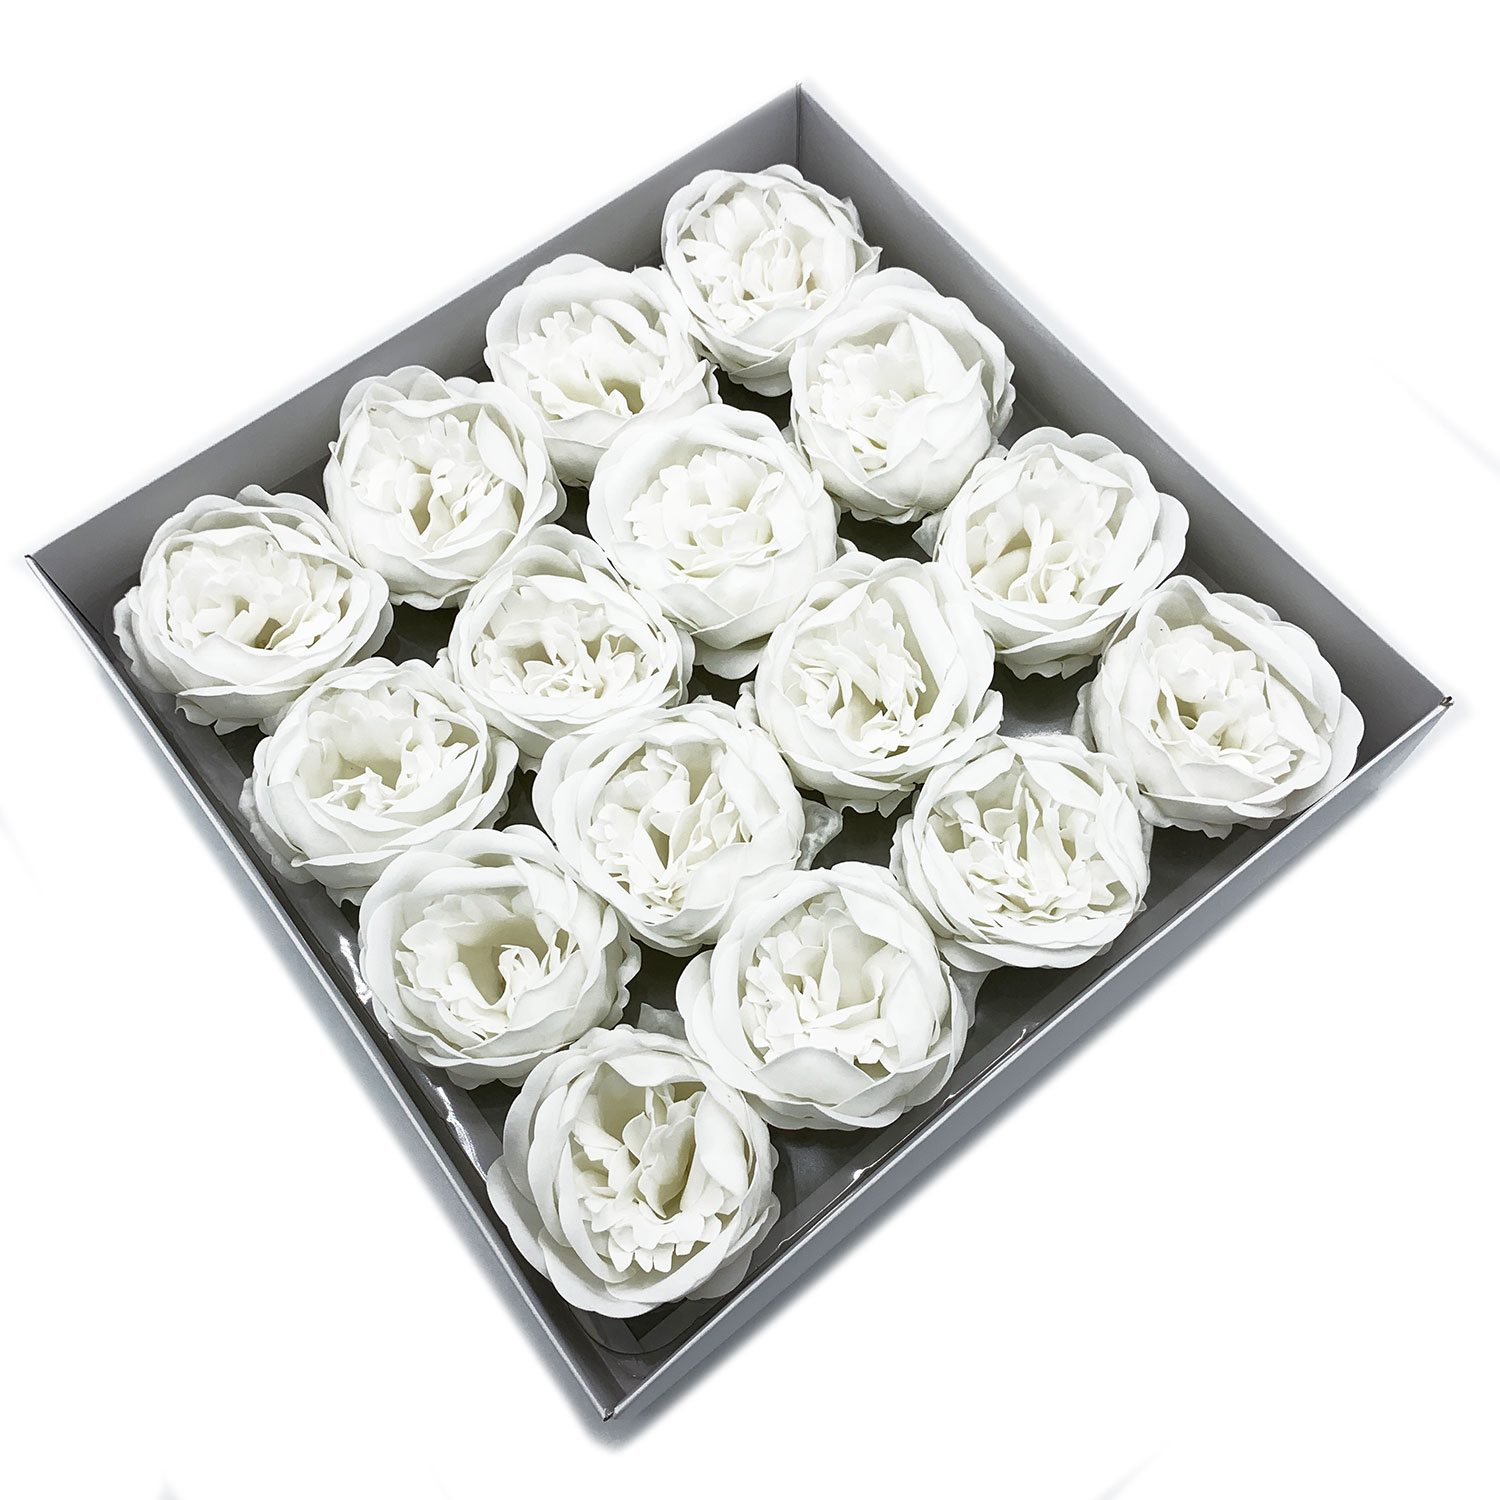 10 x Craft Soap Flowers - Ext Large Peony - White